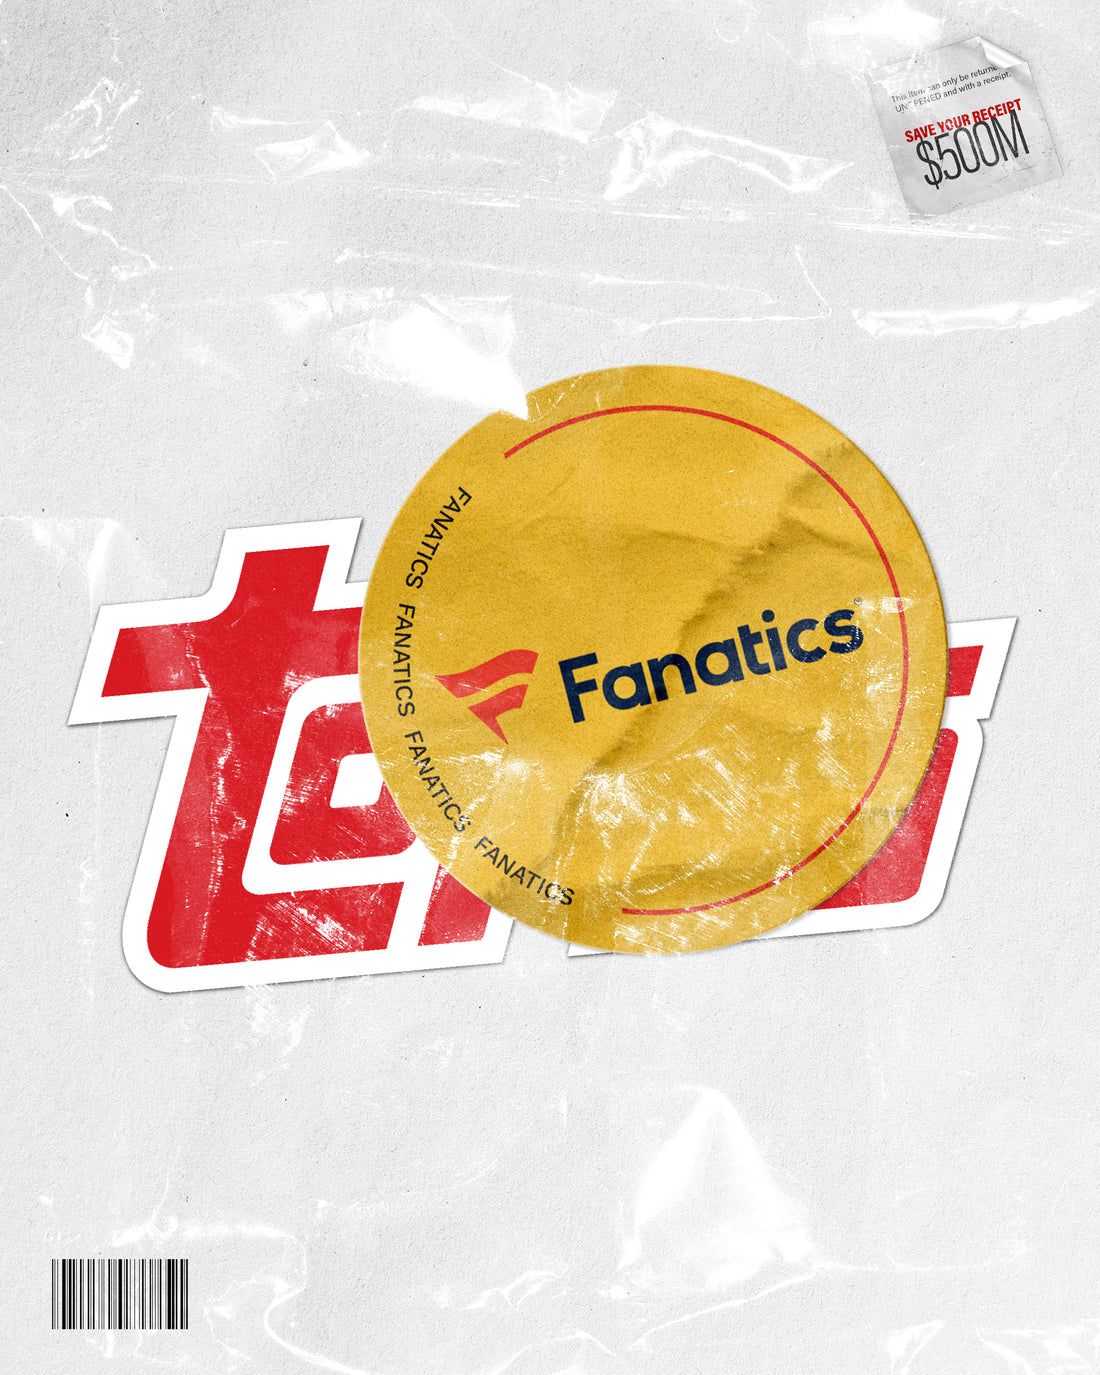 FANATICS HAS FINALLY ACQUIRED TOPPS FOR $500 MILLION